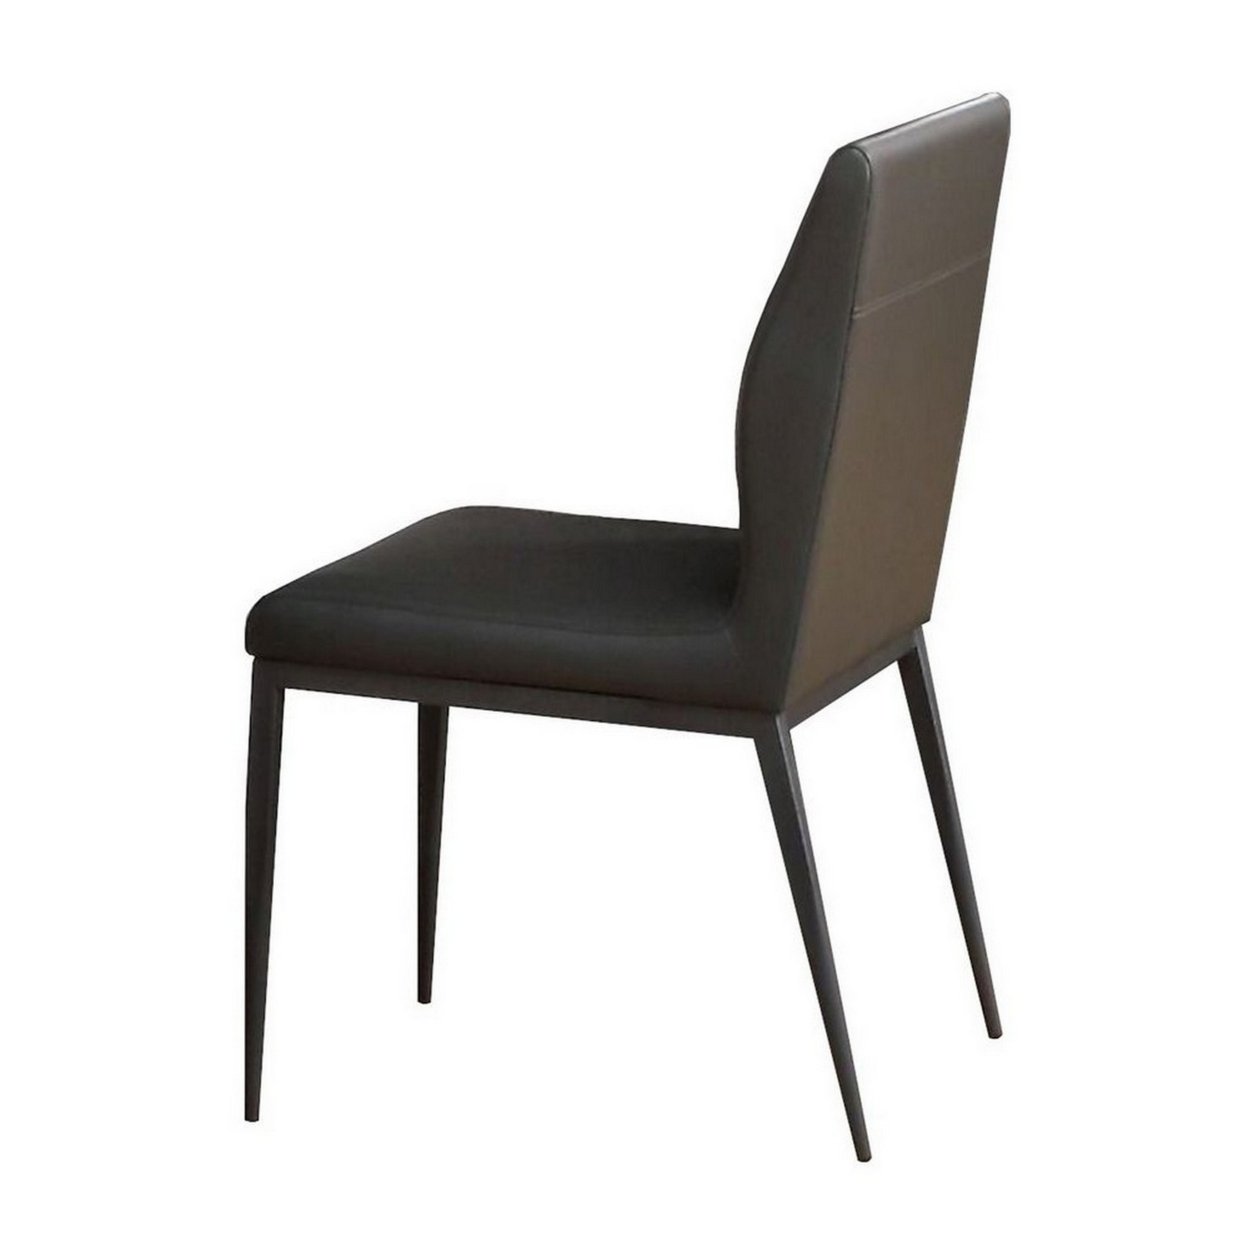 Chair With Faux Leather And Sleek Metal Legs, Gray- Saltoro Sherpi